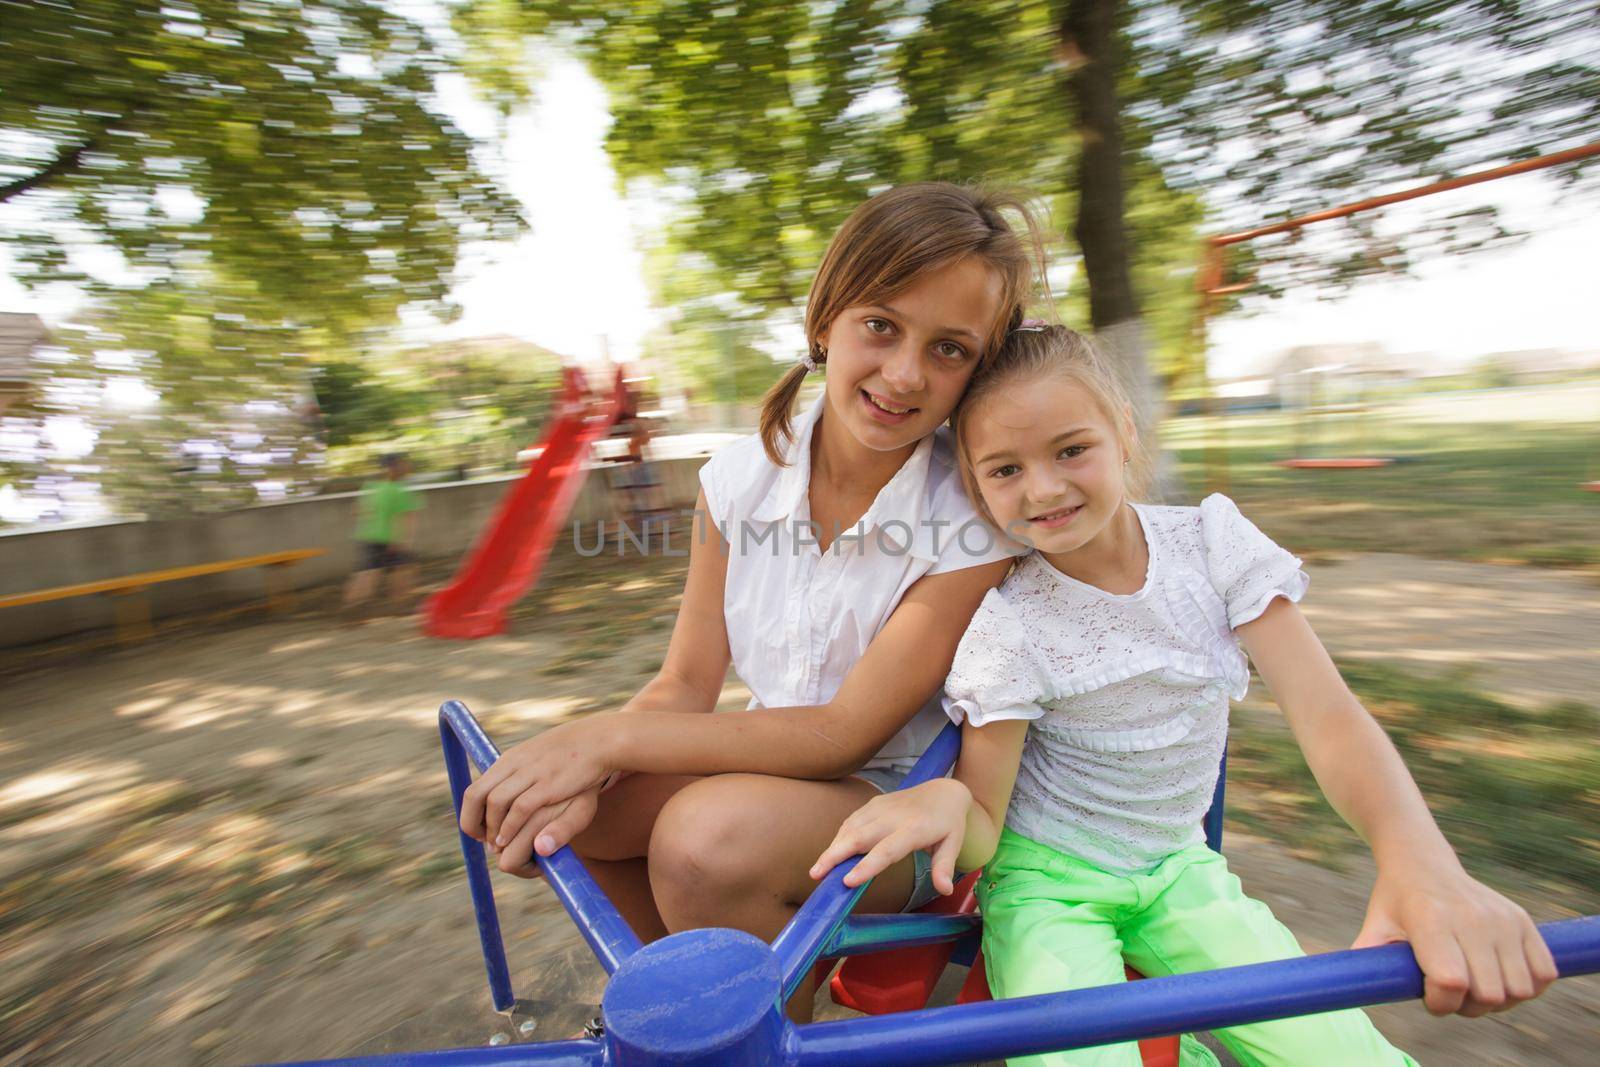 Two girls on the carousel at the playground